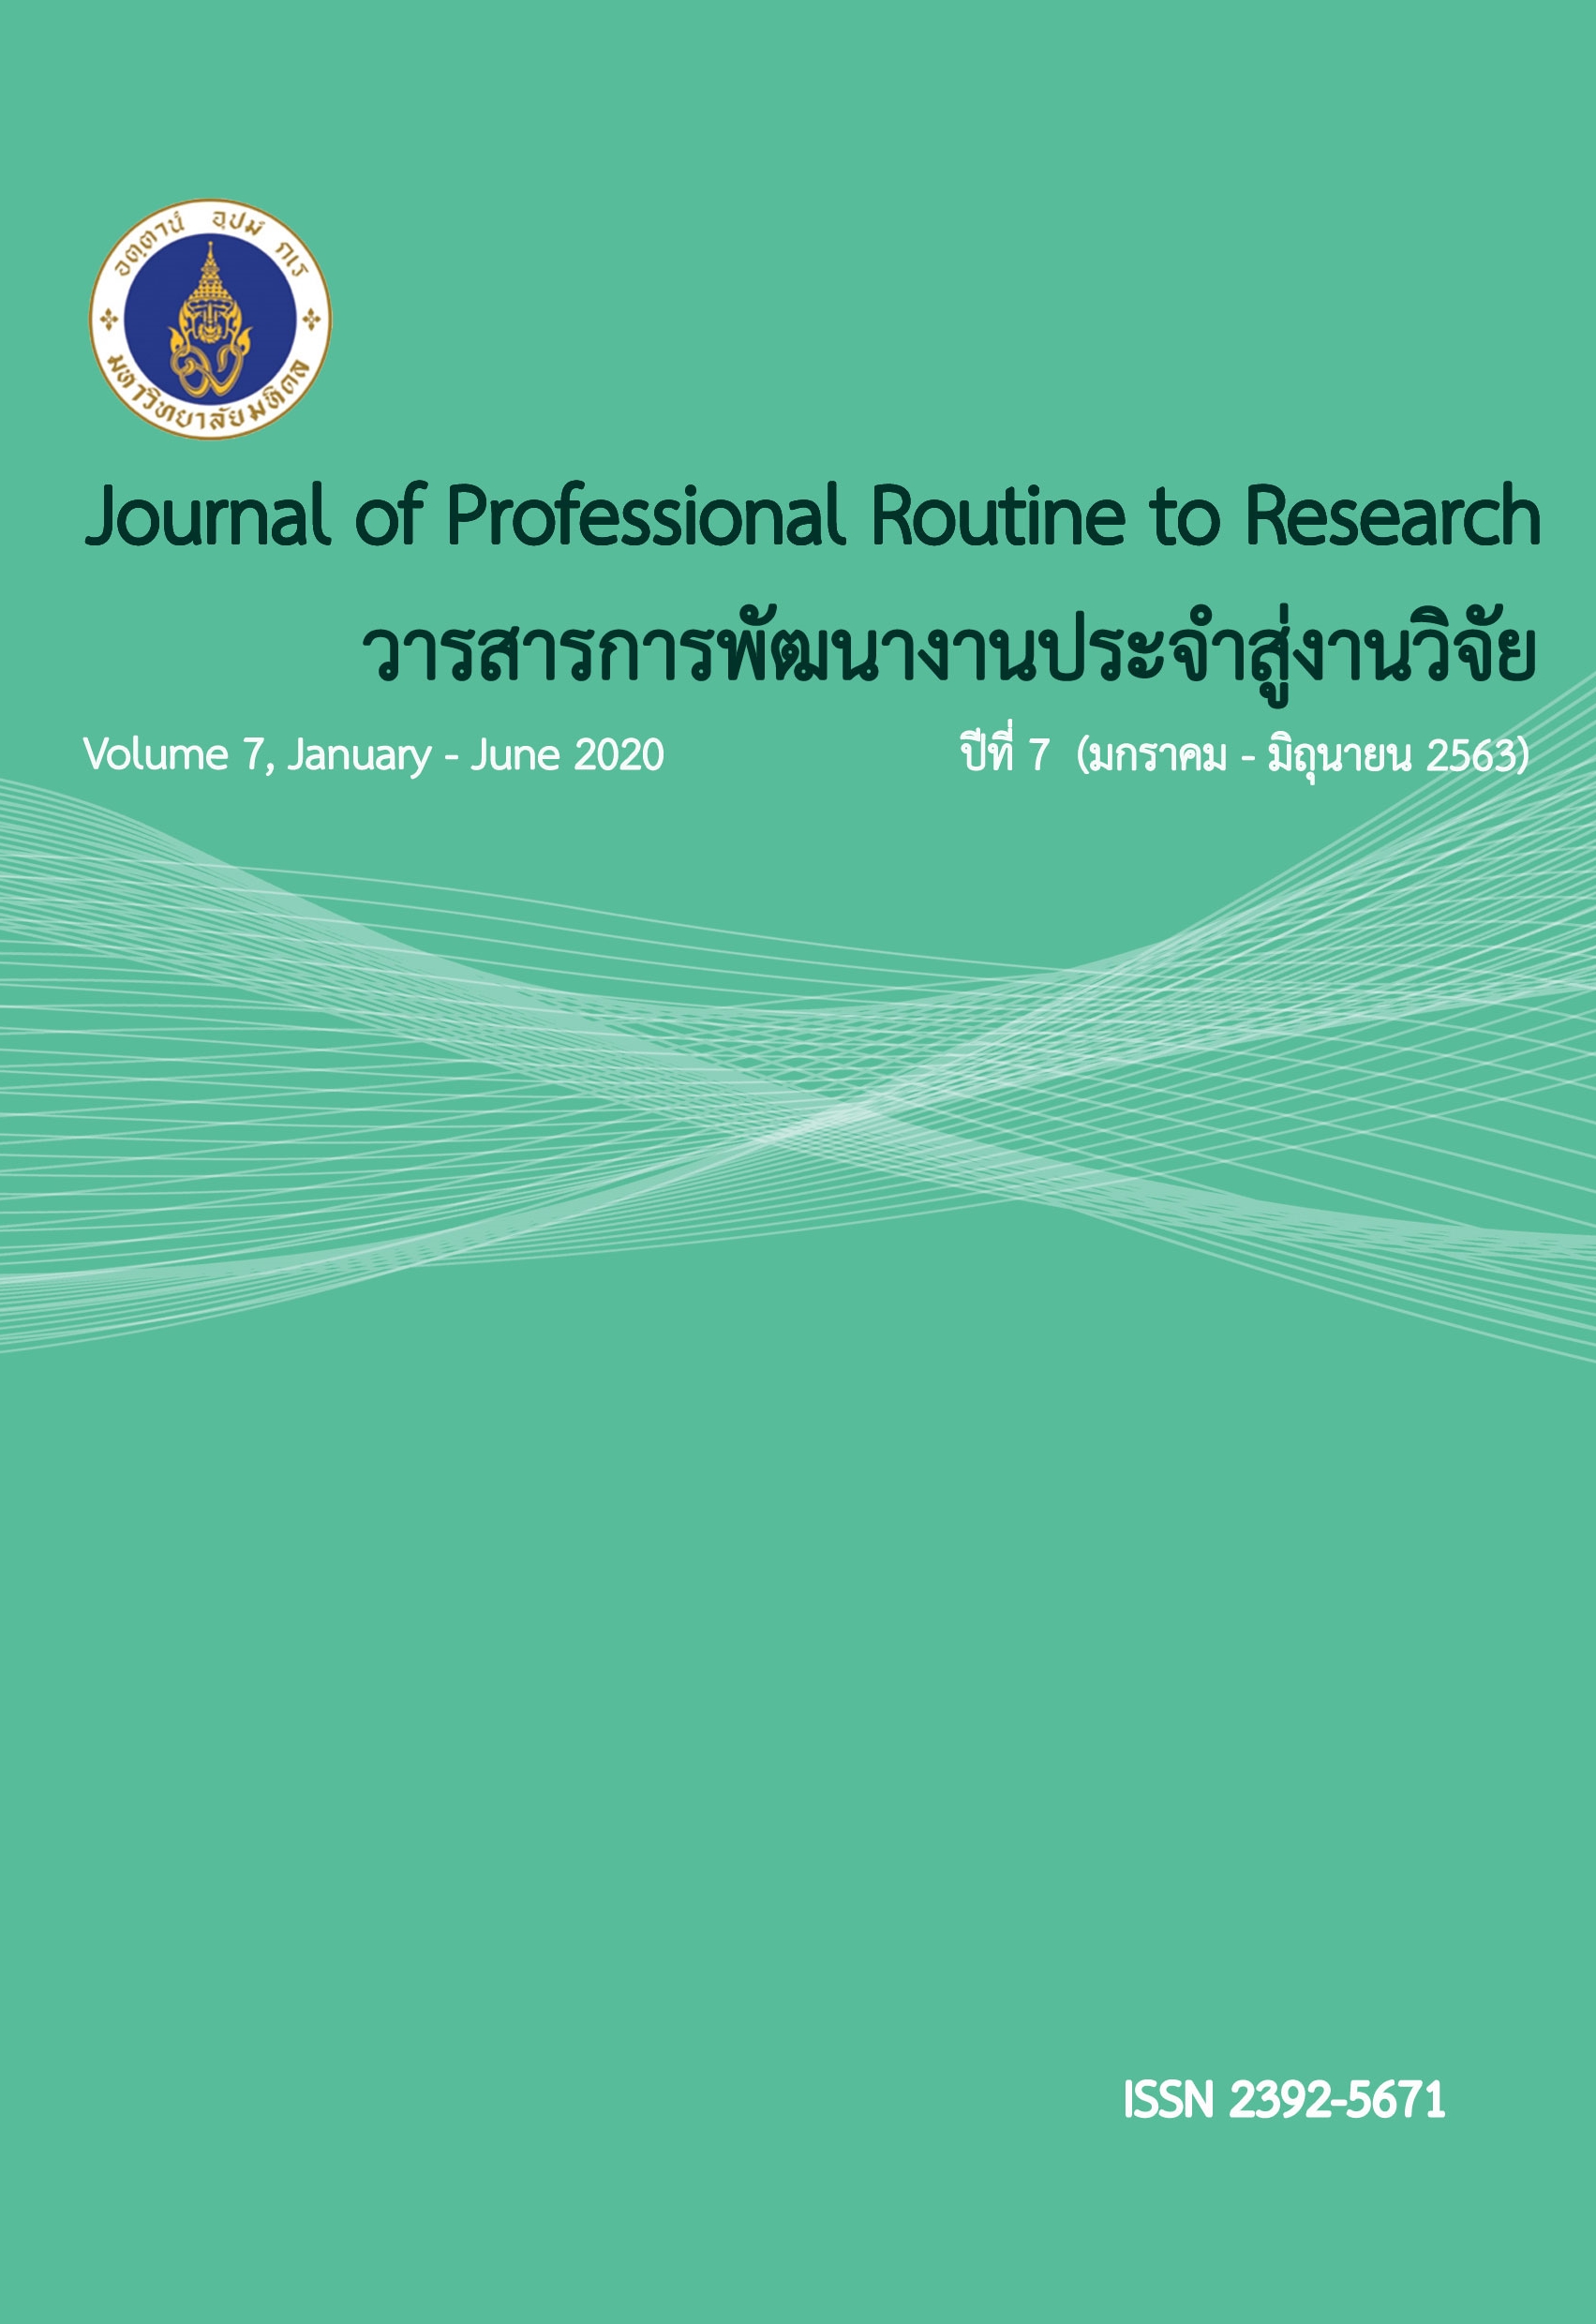 					View Vol. 7 No. 1 (2020): Journal of Professional Routine to Research (JPR2R)
				